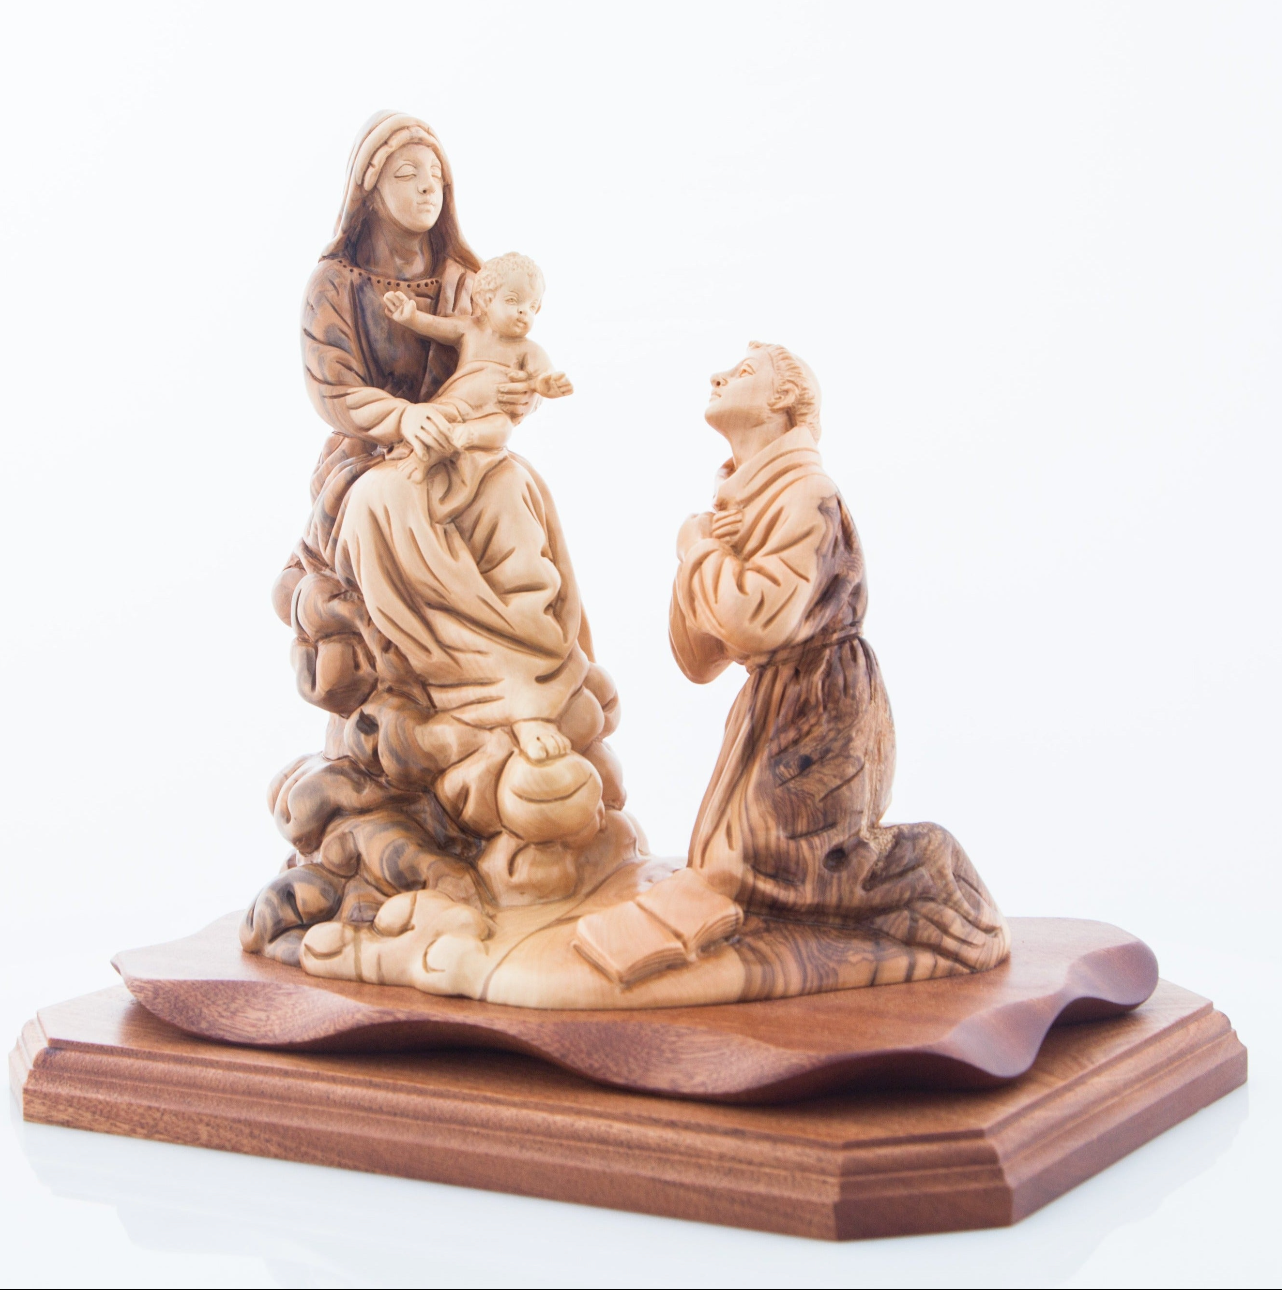 Queen of the Franciscan Order Virgin Mary Holding Baby Jesus Christ with Saint Francis Kneeling Carved Olive Wood Statue from the Holy Land